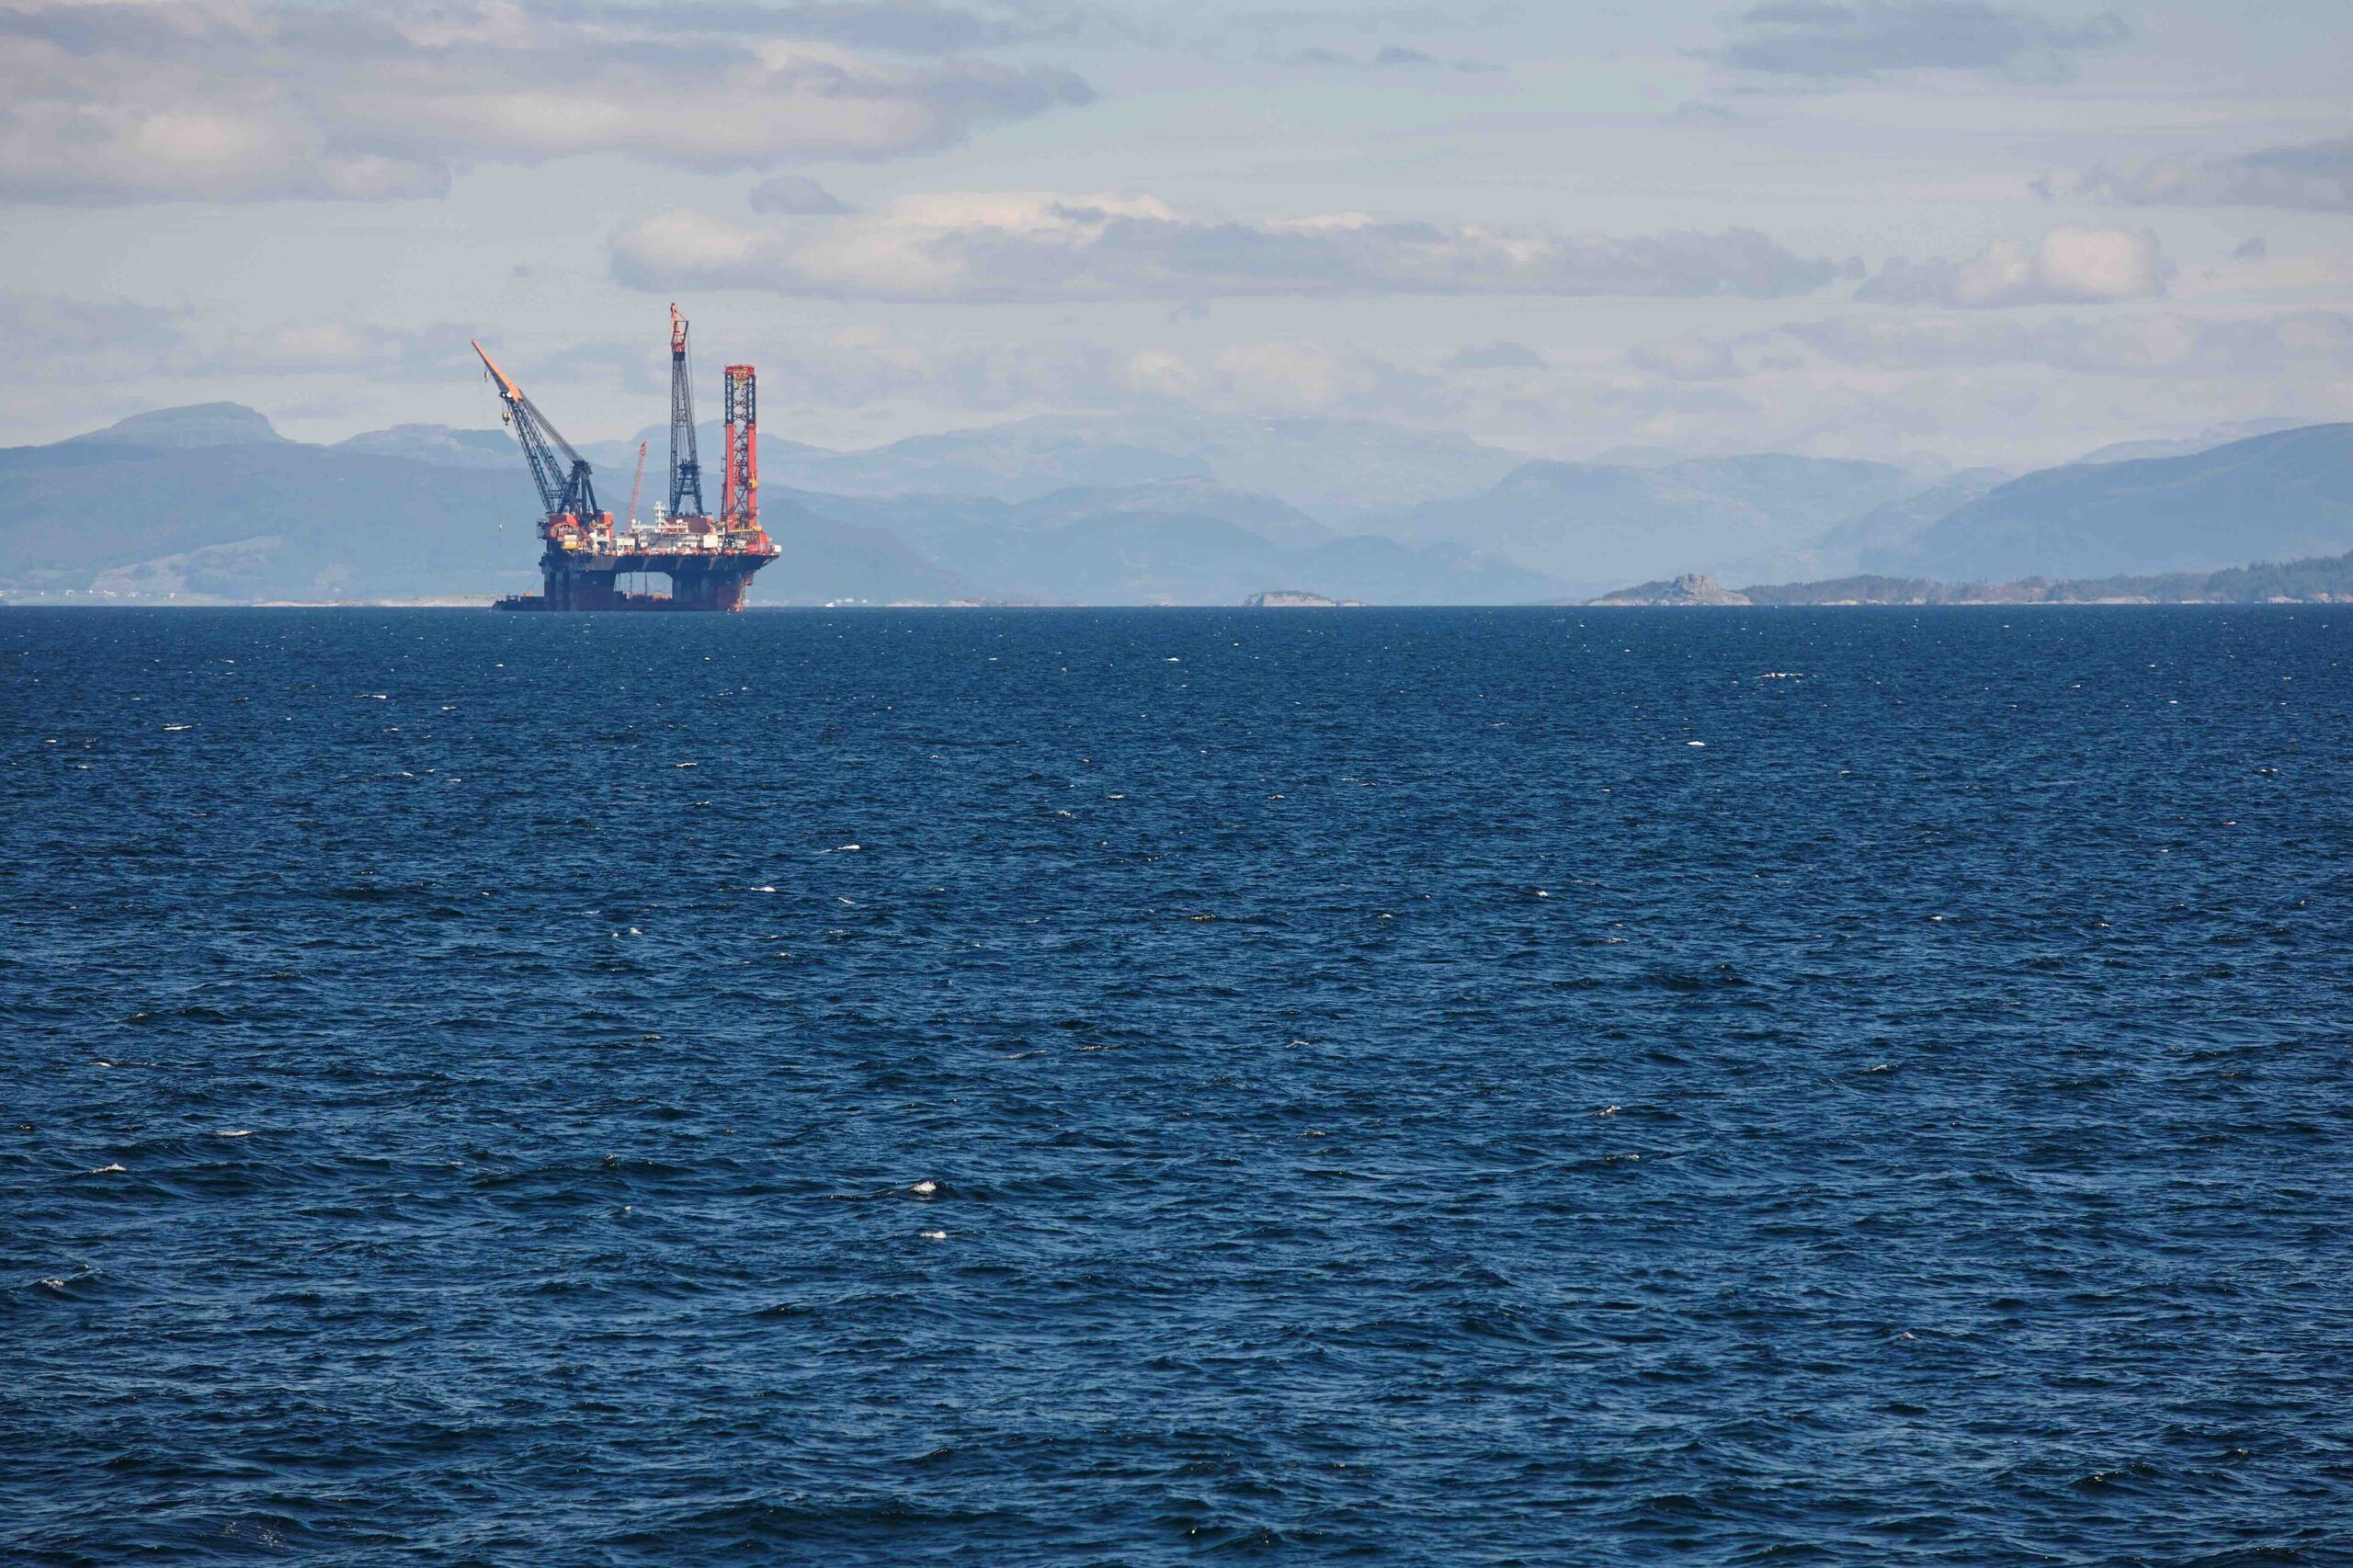 Oil and gas sea platform in the distance of a large body of water. Mountains and cloudy sky background.